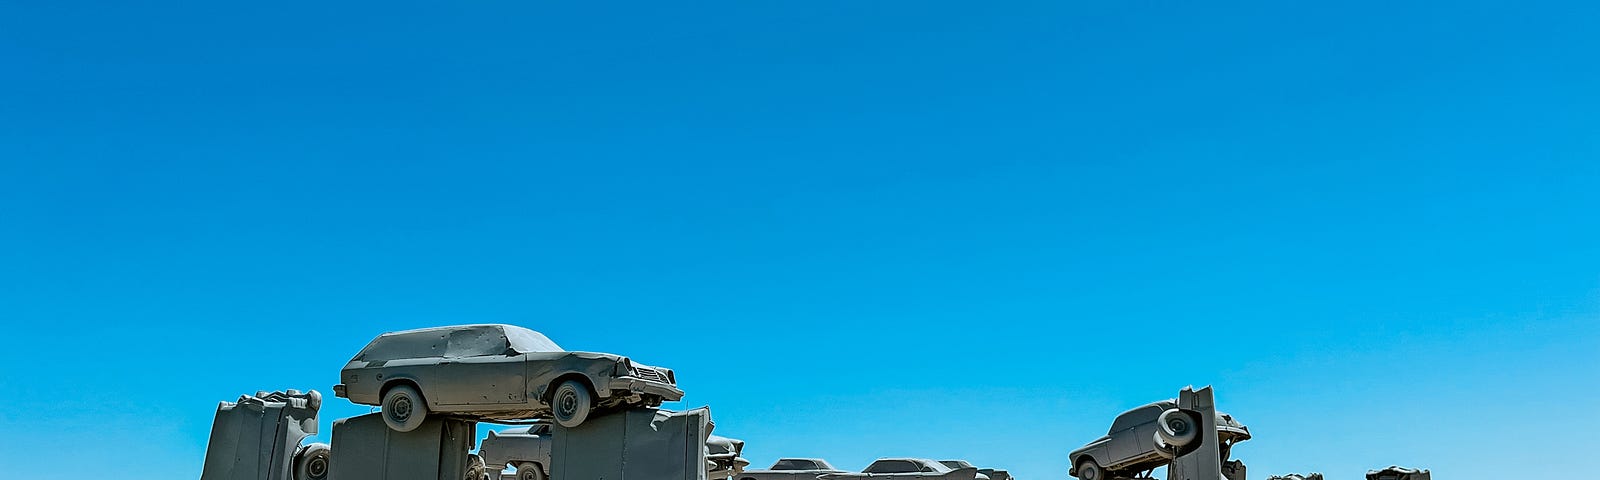 Carhenge on a sunny day